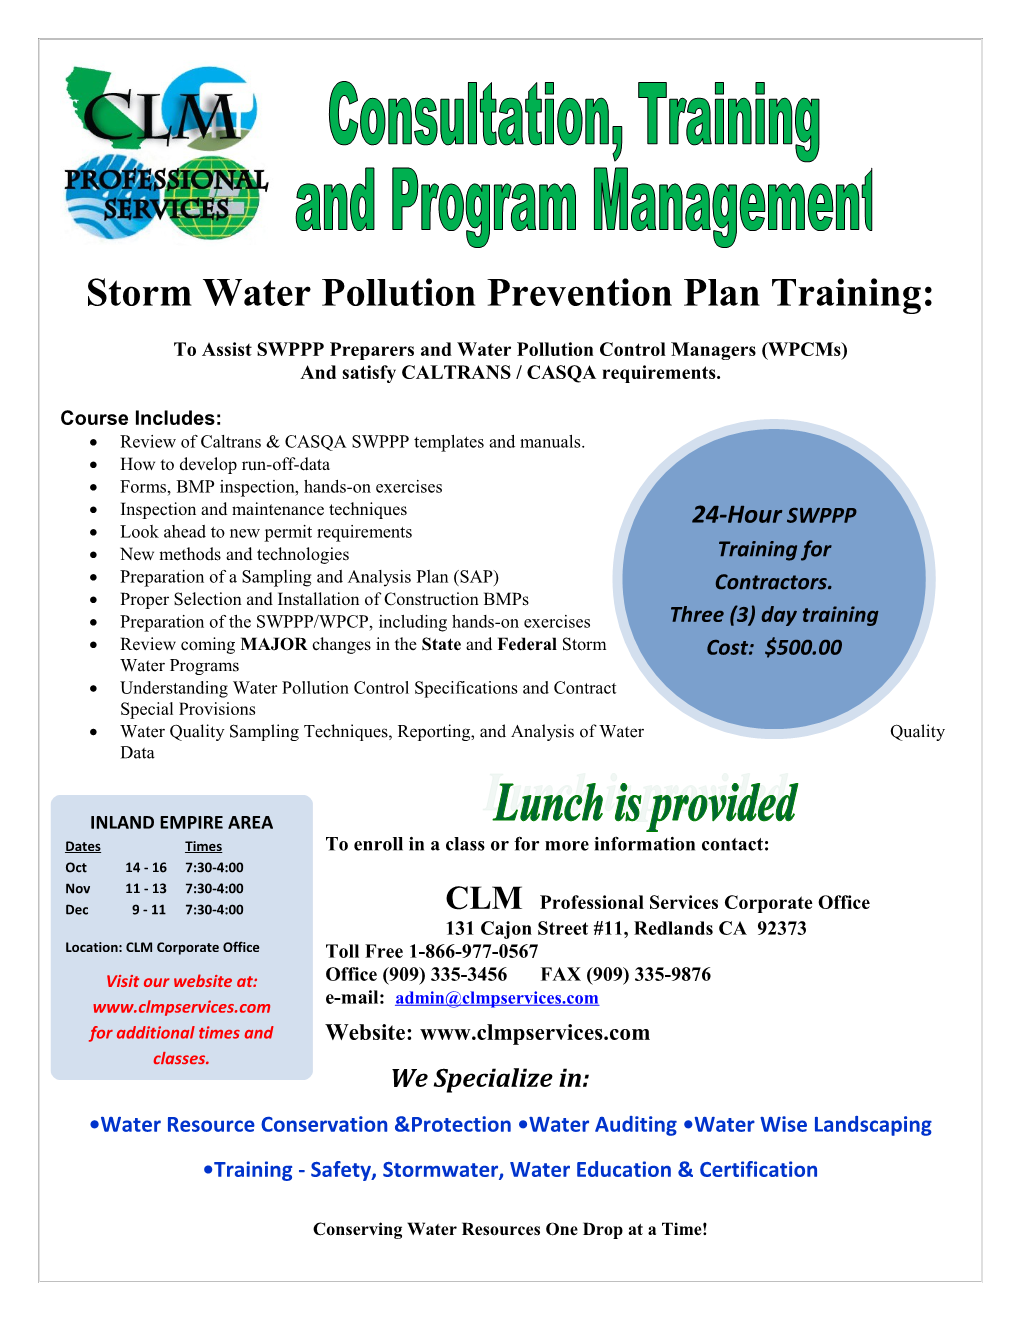 Storm Water Pollution Prevention Plan Training